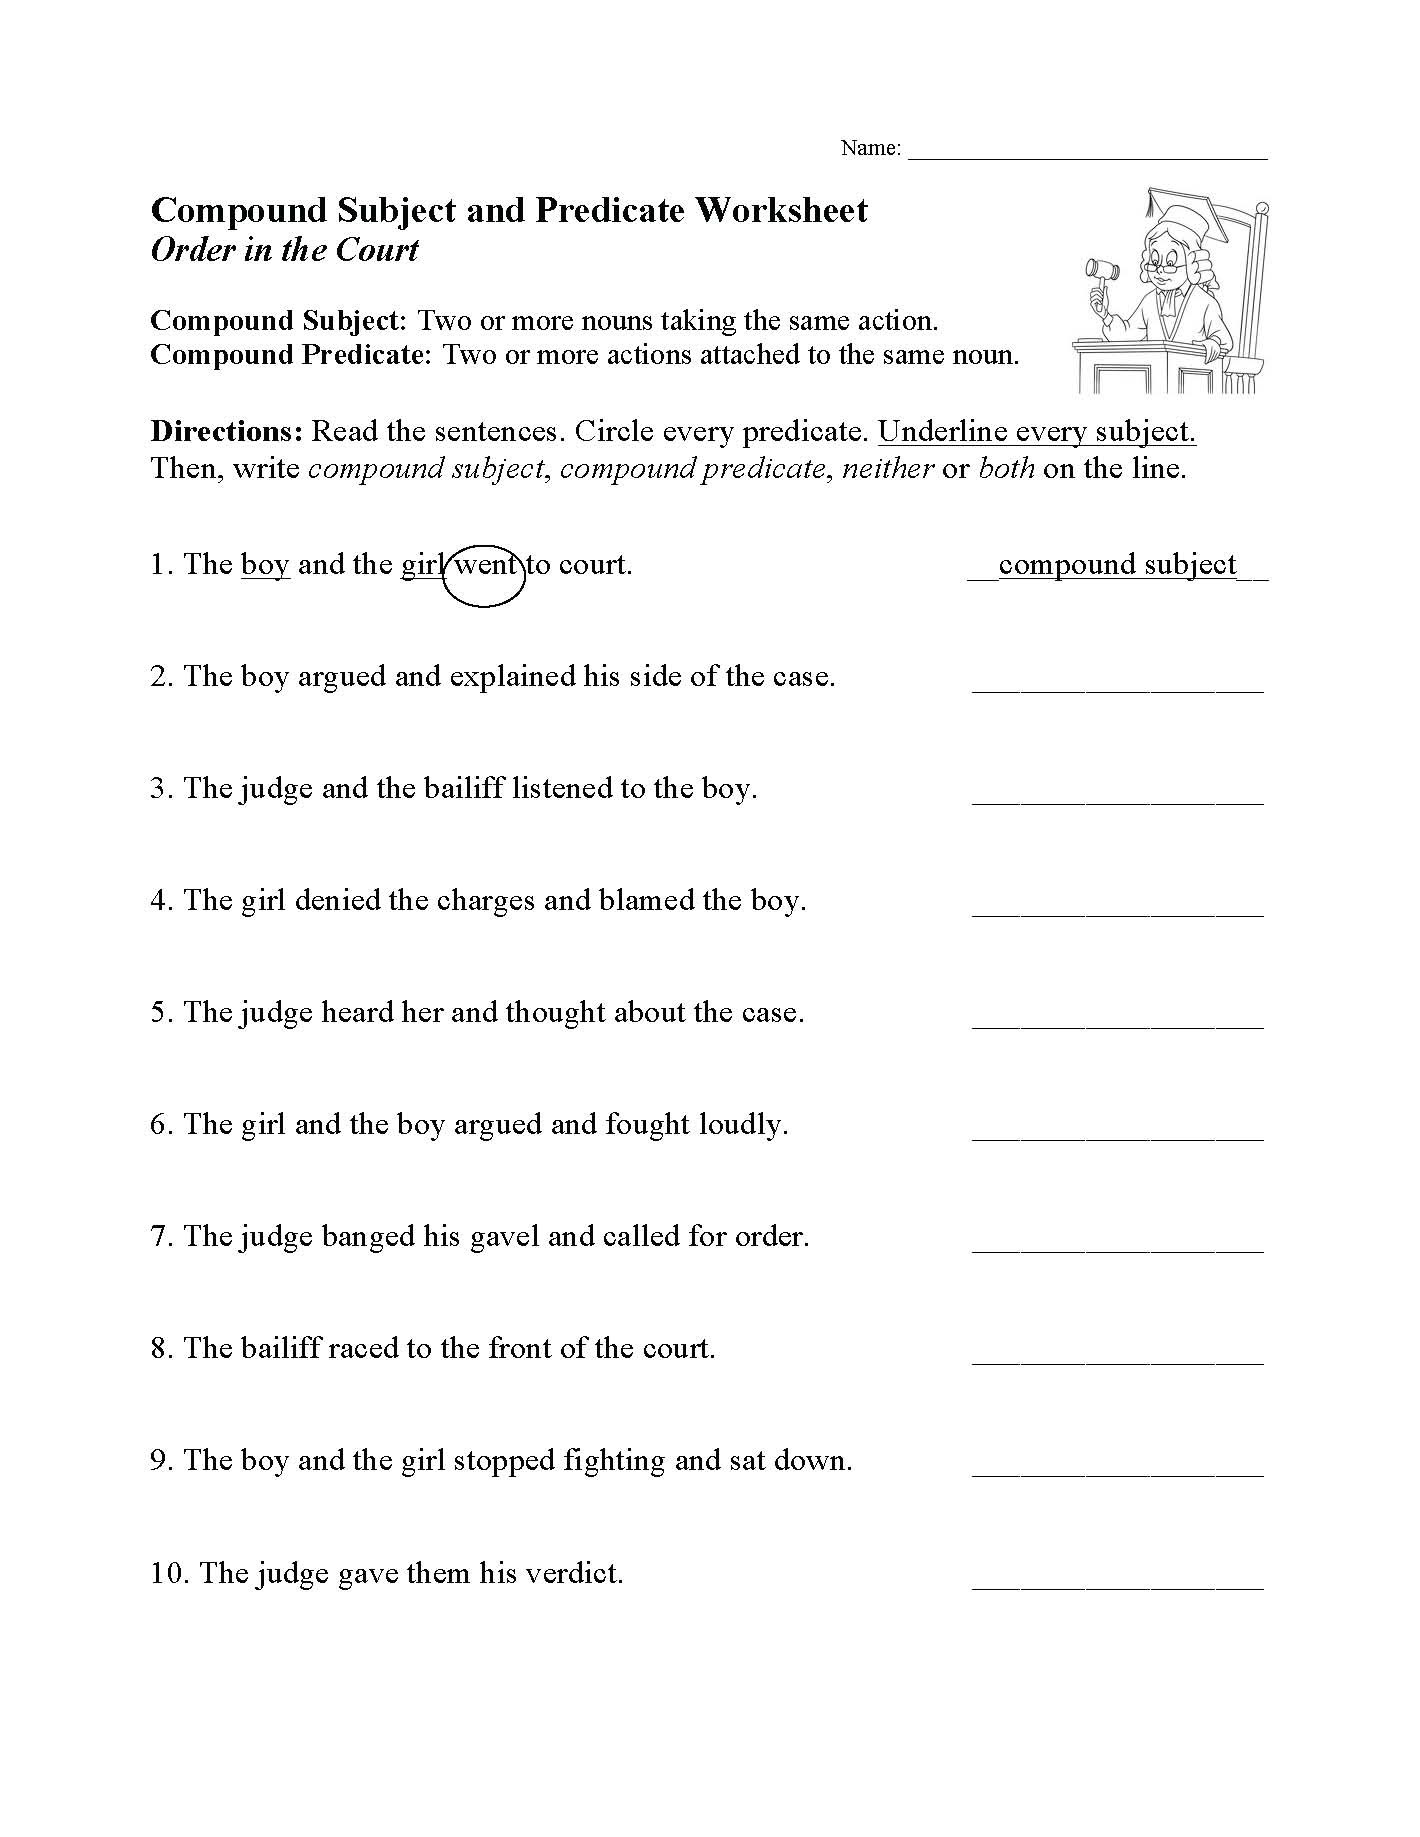 Compound Subject and Predicate Worksheet  Sentence Structure Activity Throughout Subject Predicate Worksheet Pdf